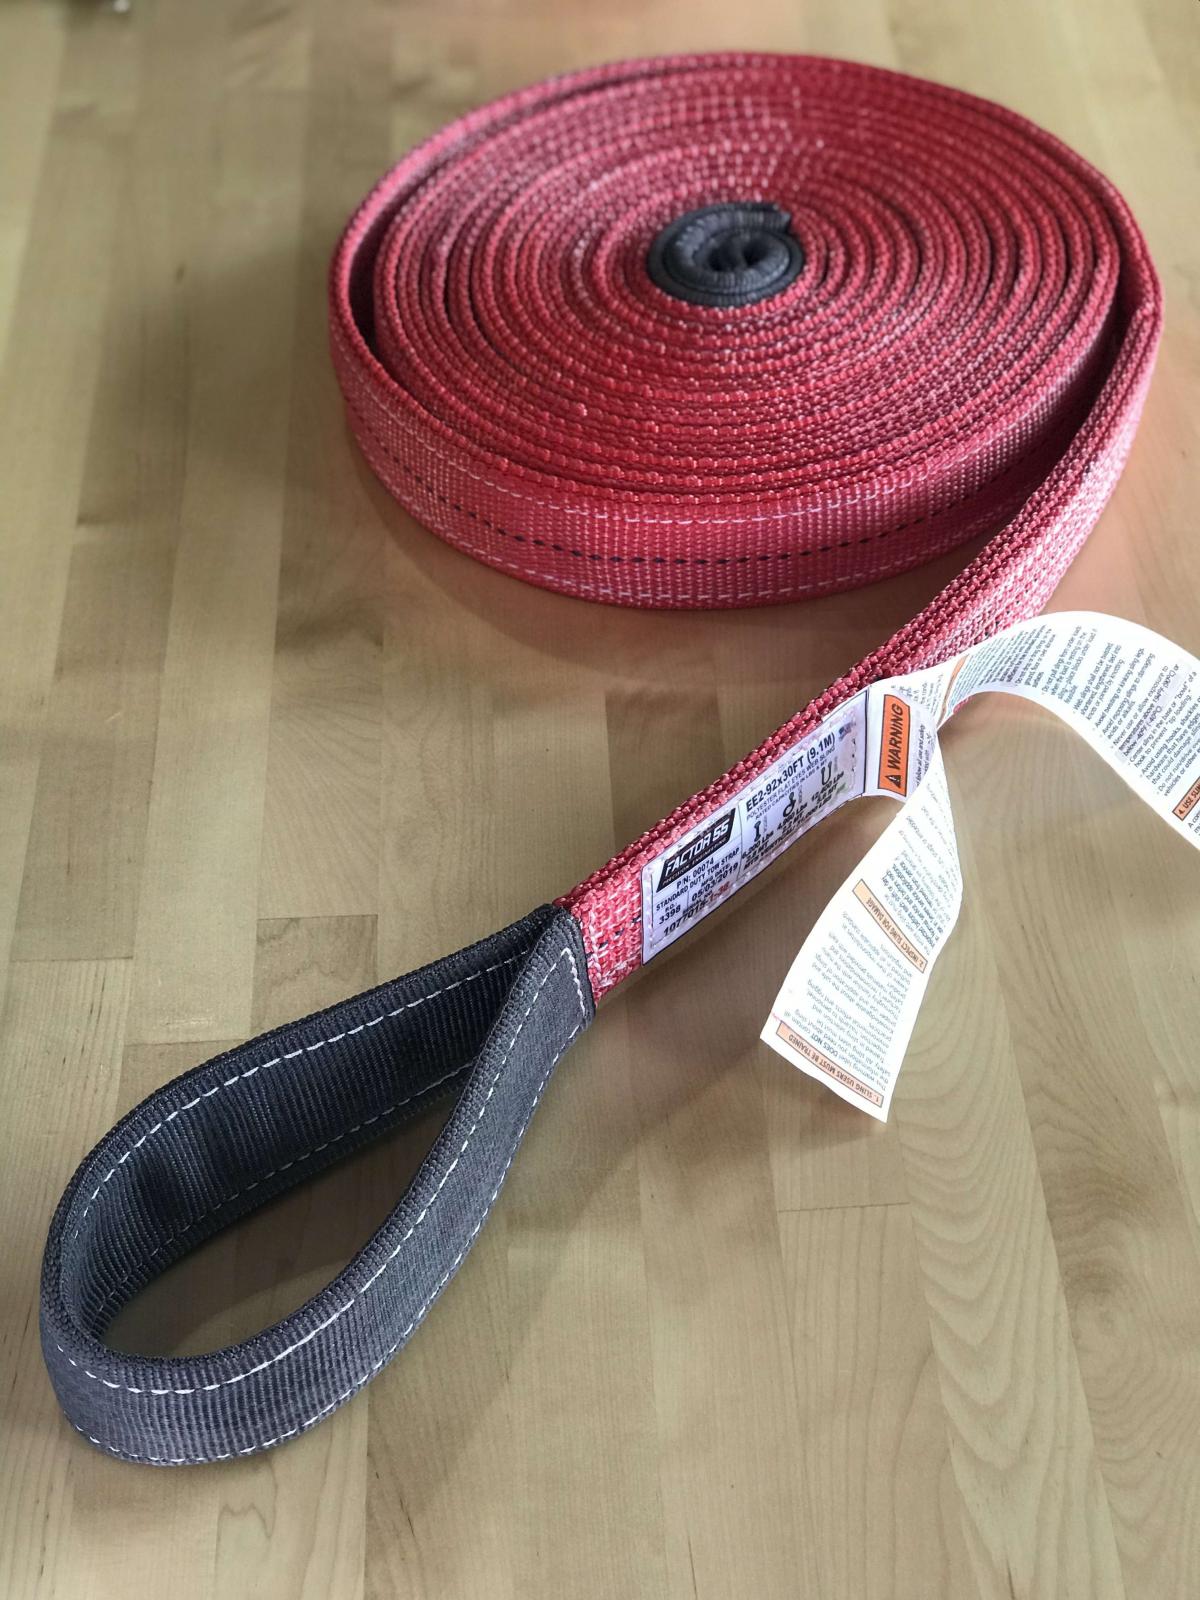 Factor 55 30 Foot Tow Strap Standard Duty 30 Foot x 2 Inch Red Factor 55